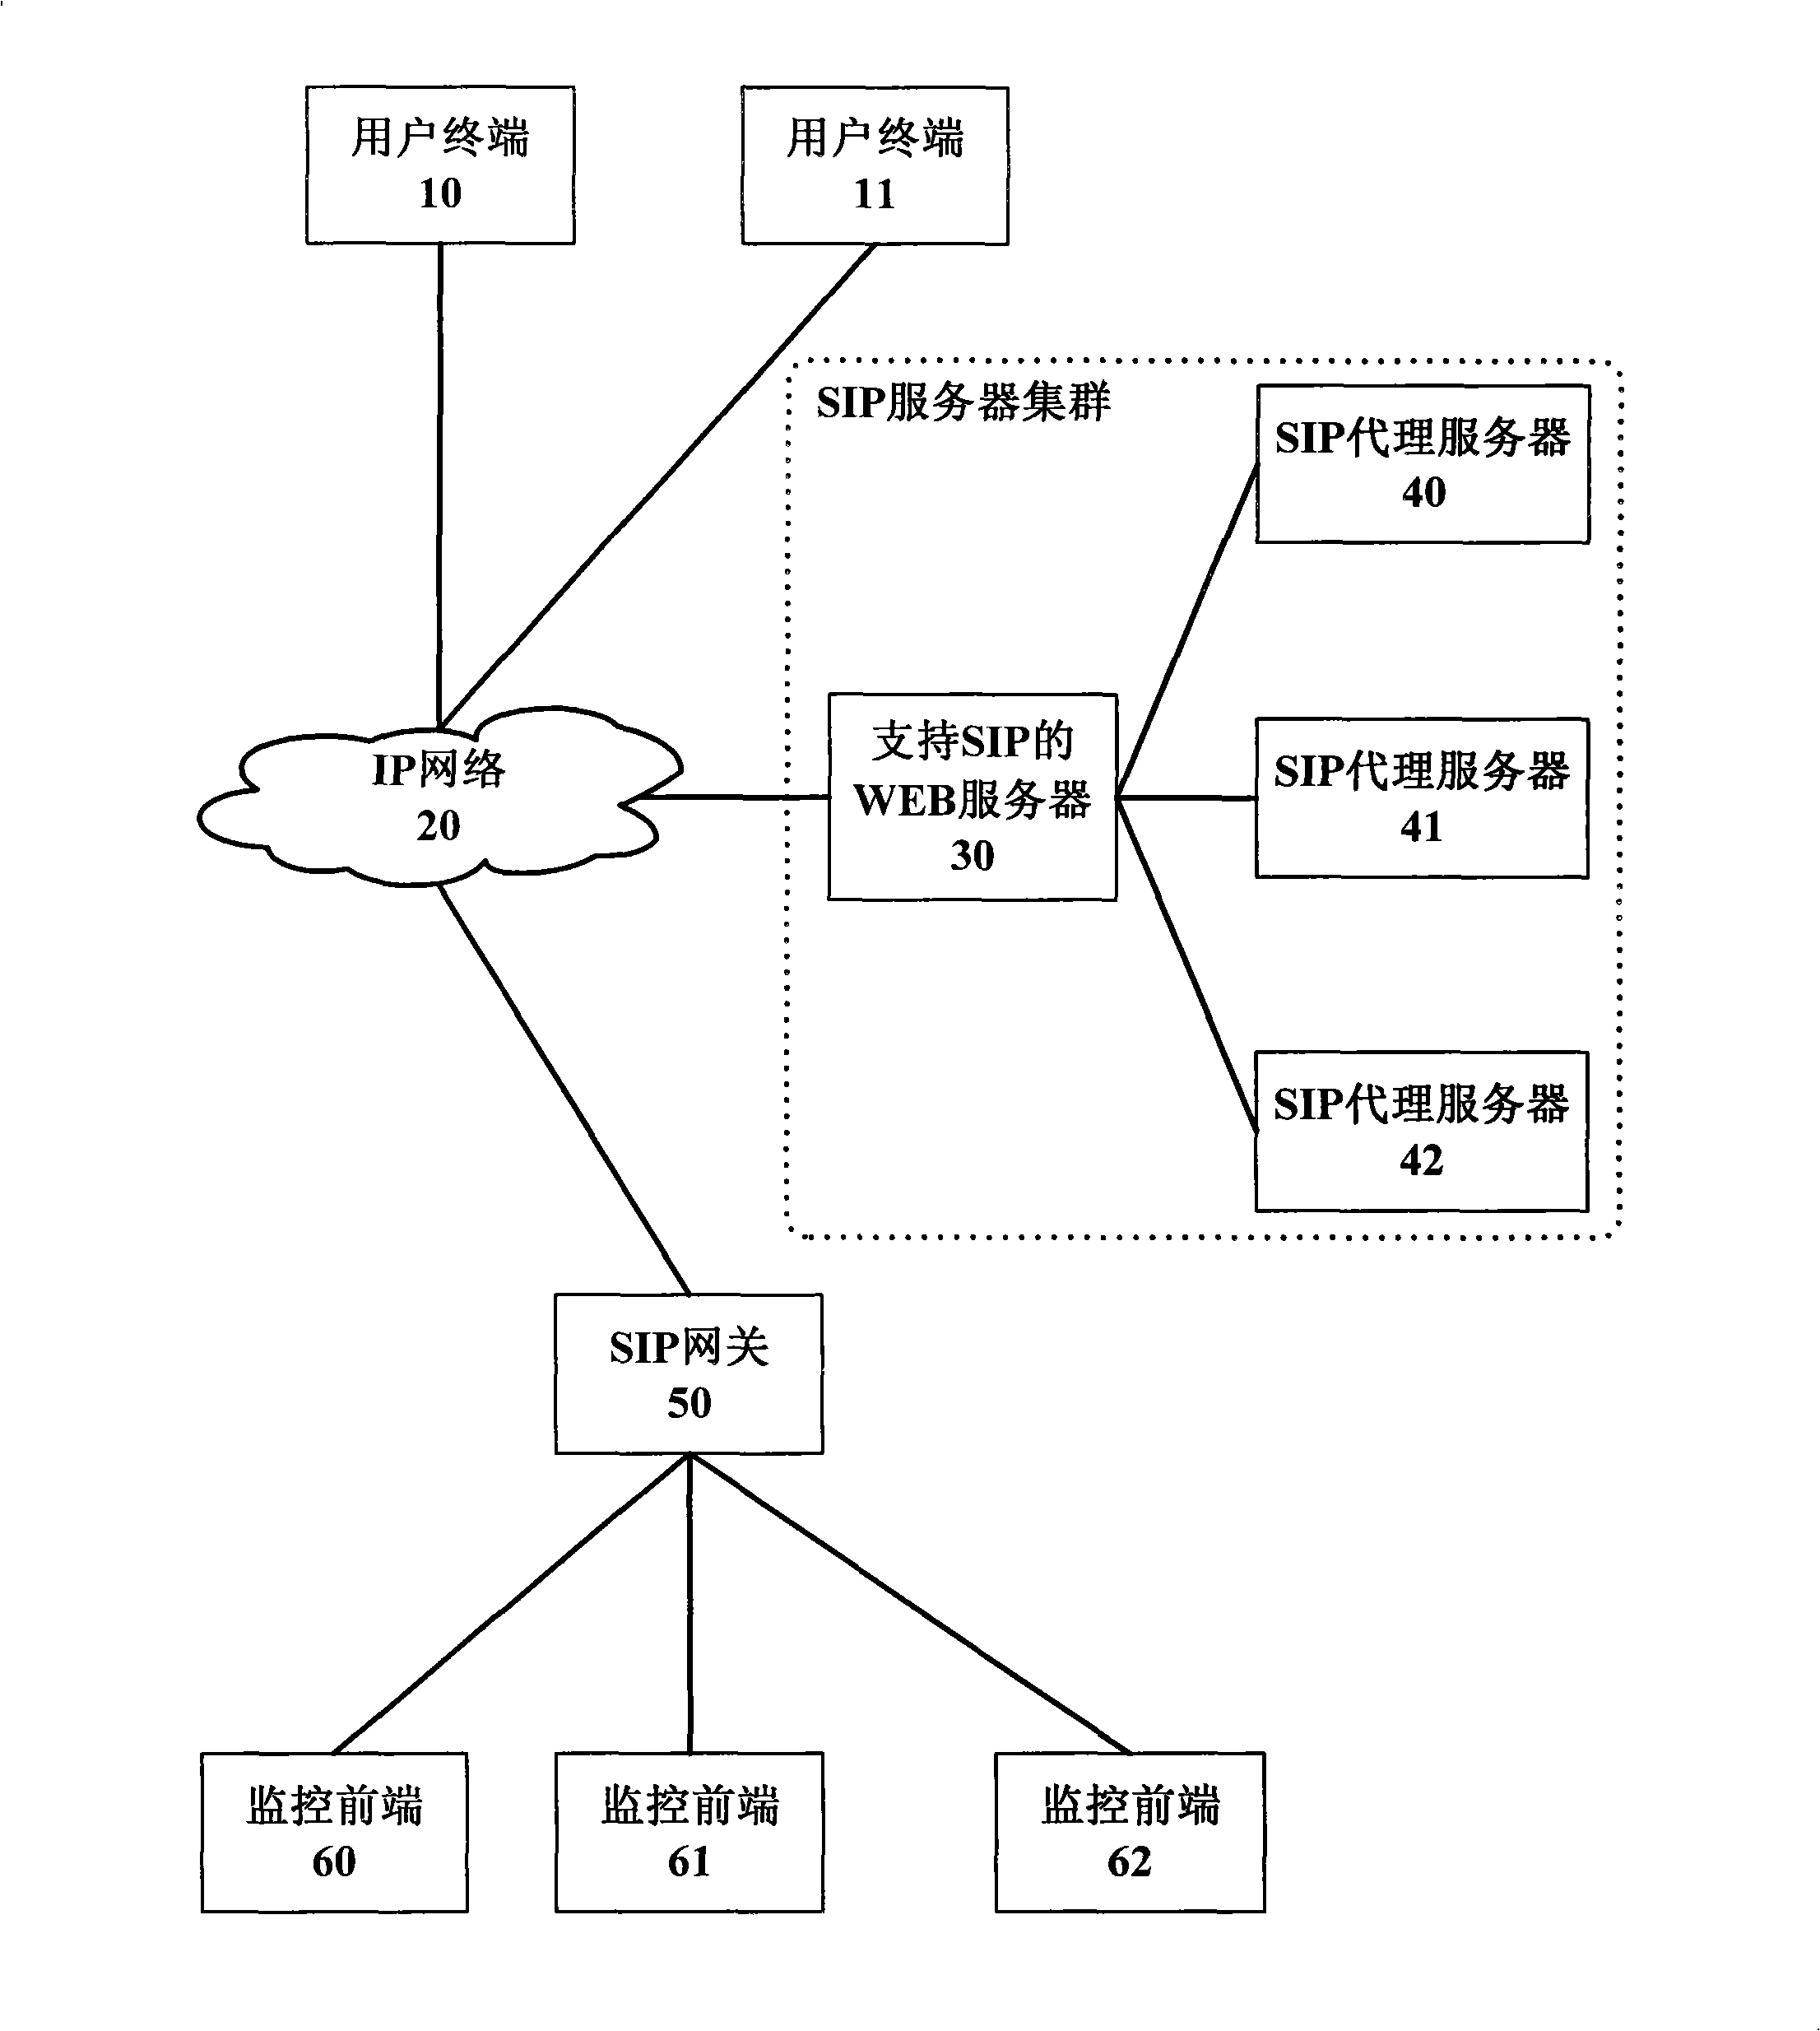 Method for video monitoring platform to operate and control front-end device based on SIP server cluster